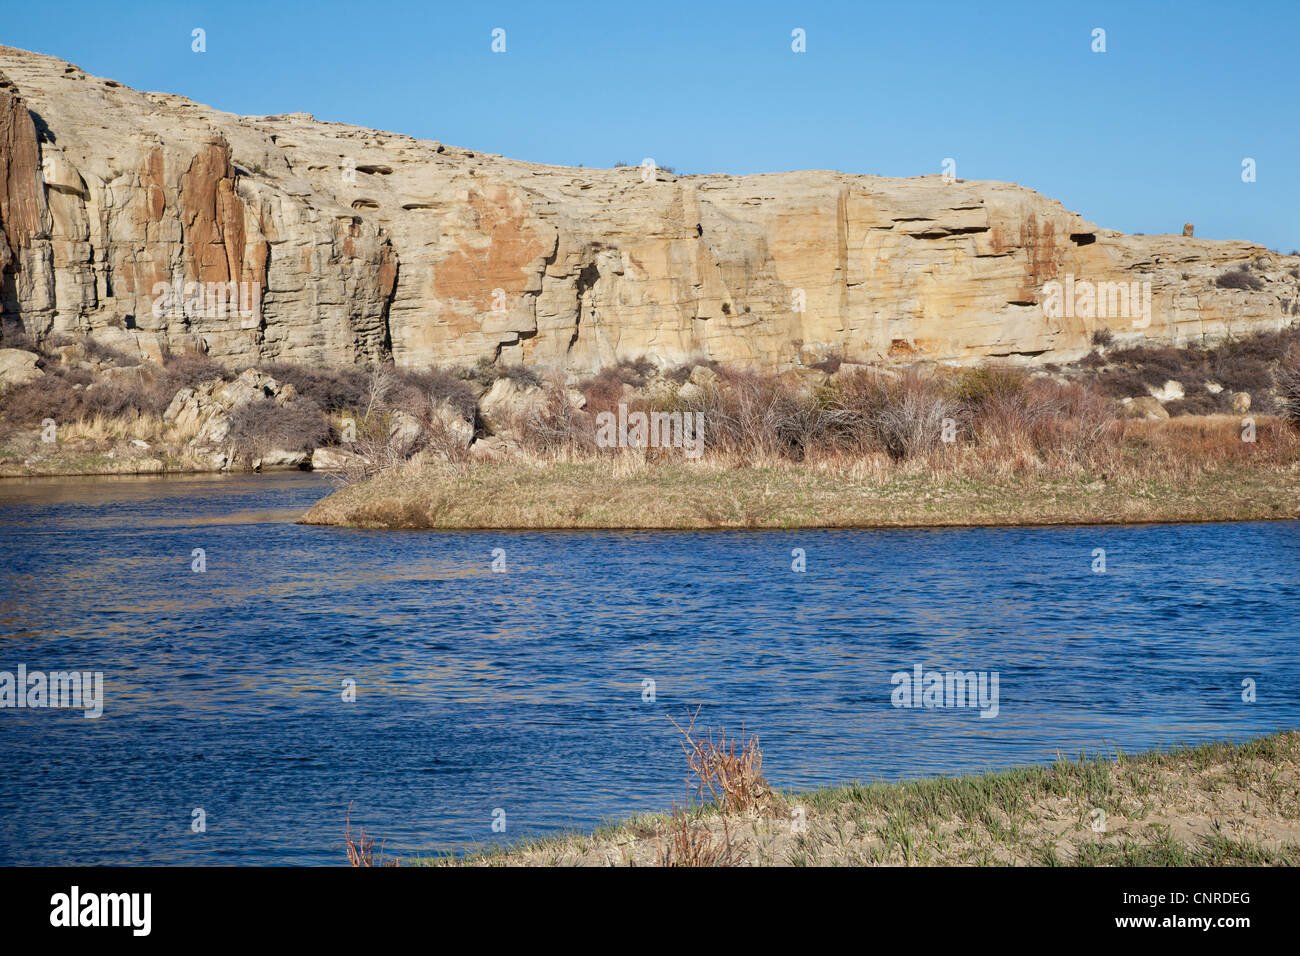 North Platte River in high desert landscape north of Saratoga, Wyoming, early spring Stock Photo